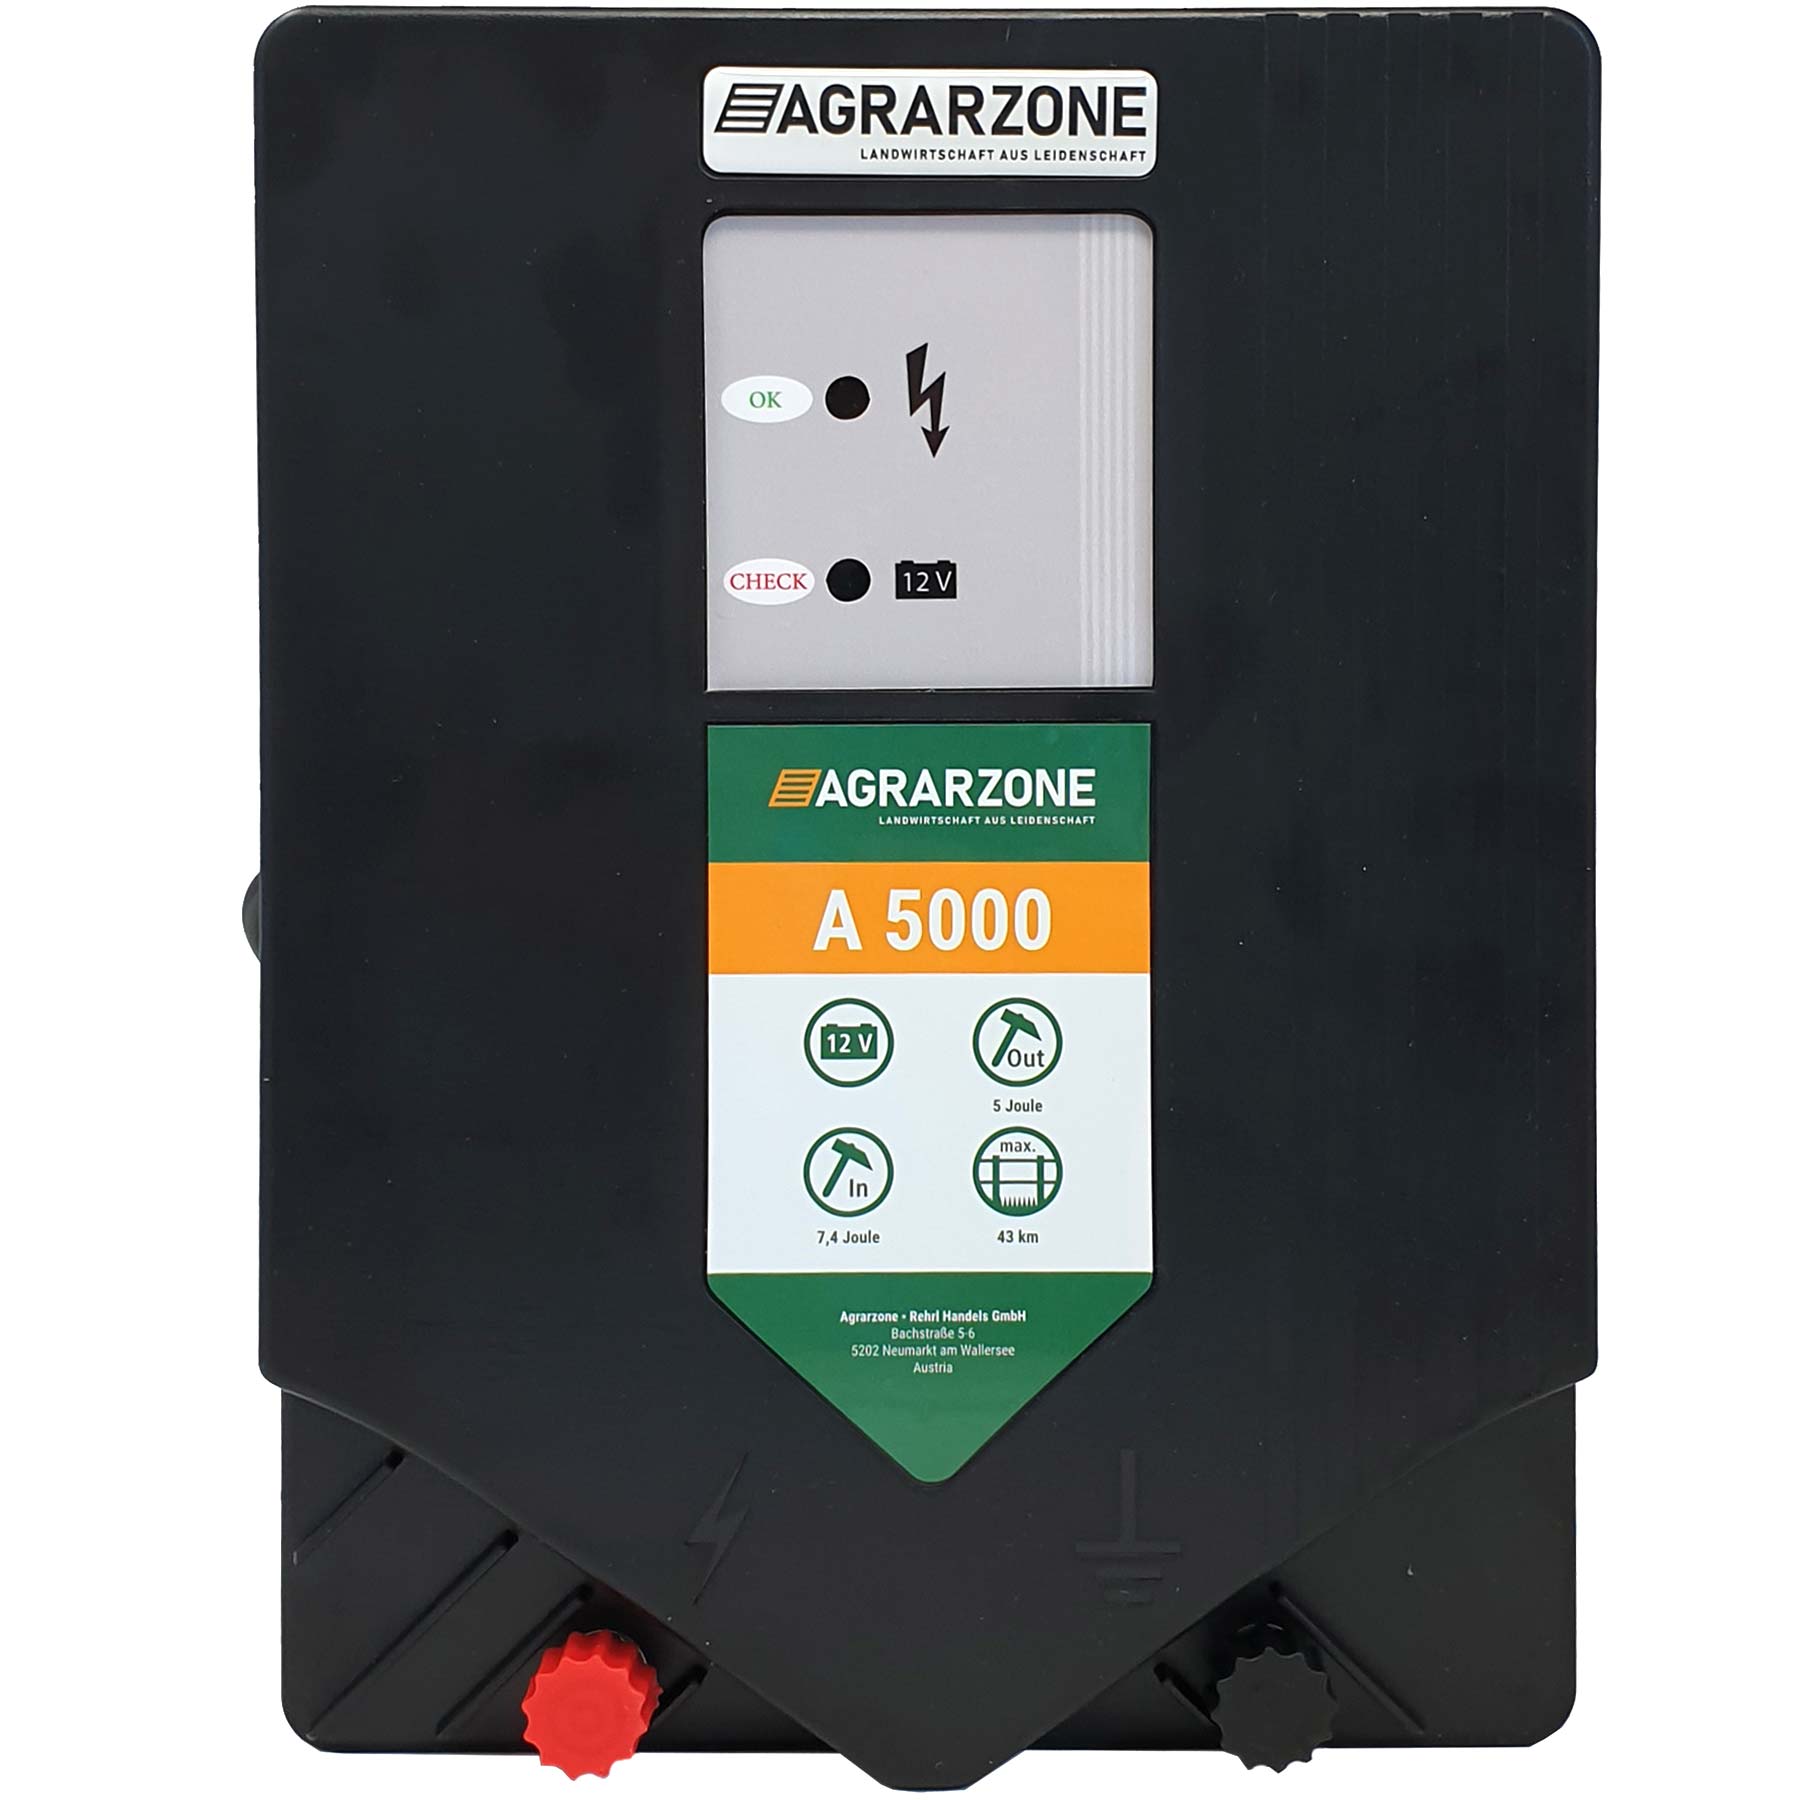 Agrarzone A 5000 energizer 12V, 7.5 joules